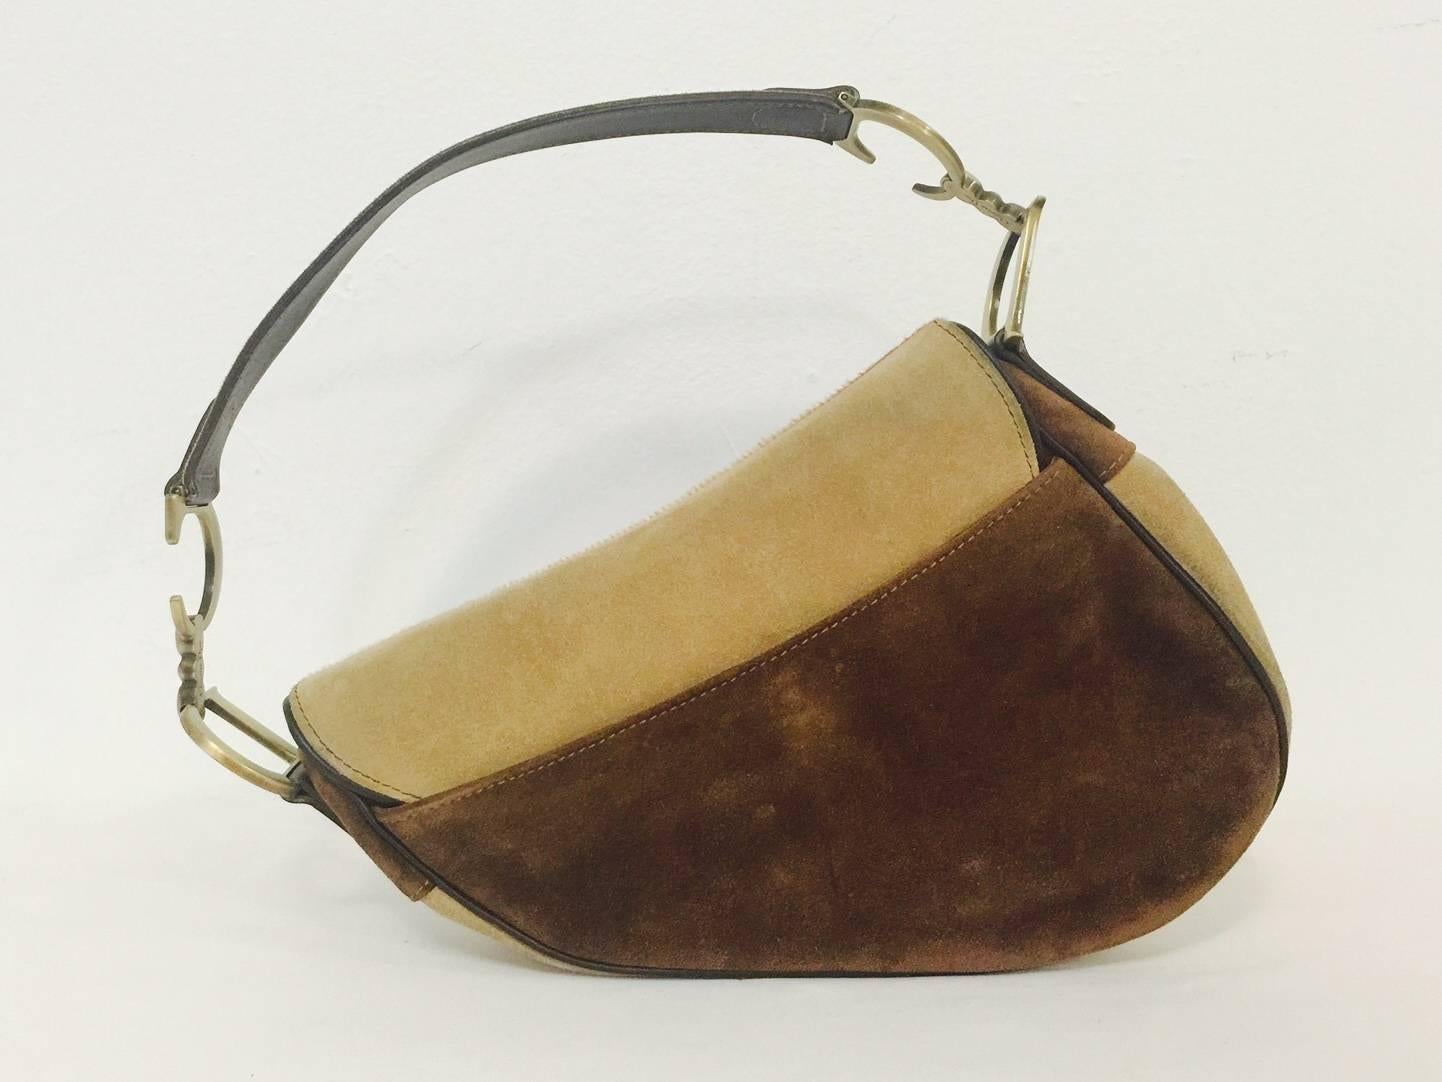 Since it's introduction in the late 1990s, Christian Dior's Saddle Bag has become an iconic accessory coveted by socialites and celebrities alike.  Features the now renown design fashioned in luxurious chocolate, toffee and tan calf hair.  Signature